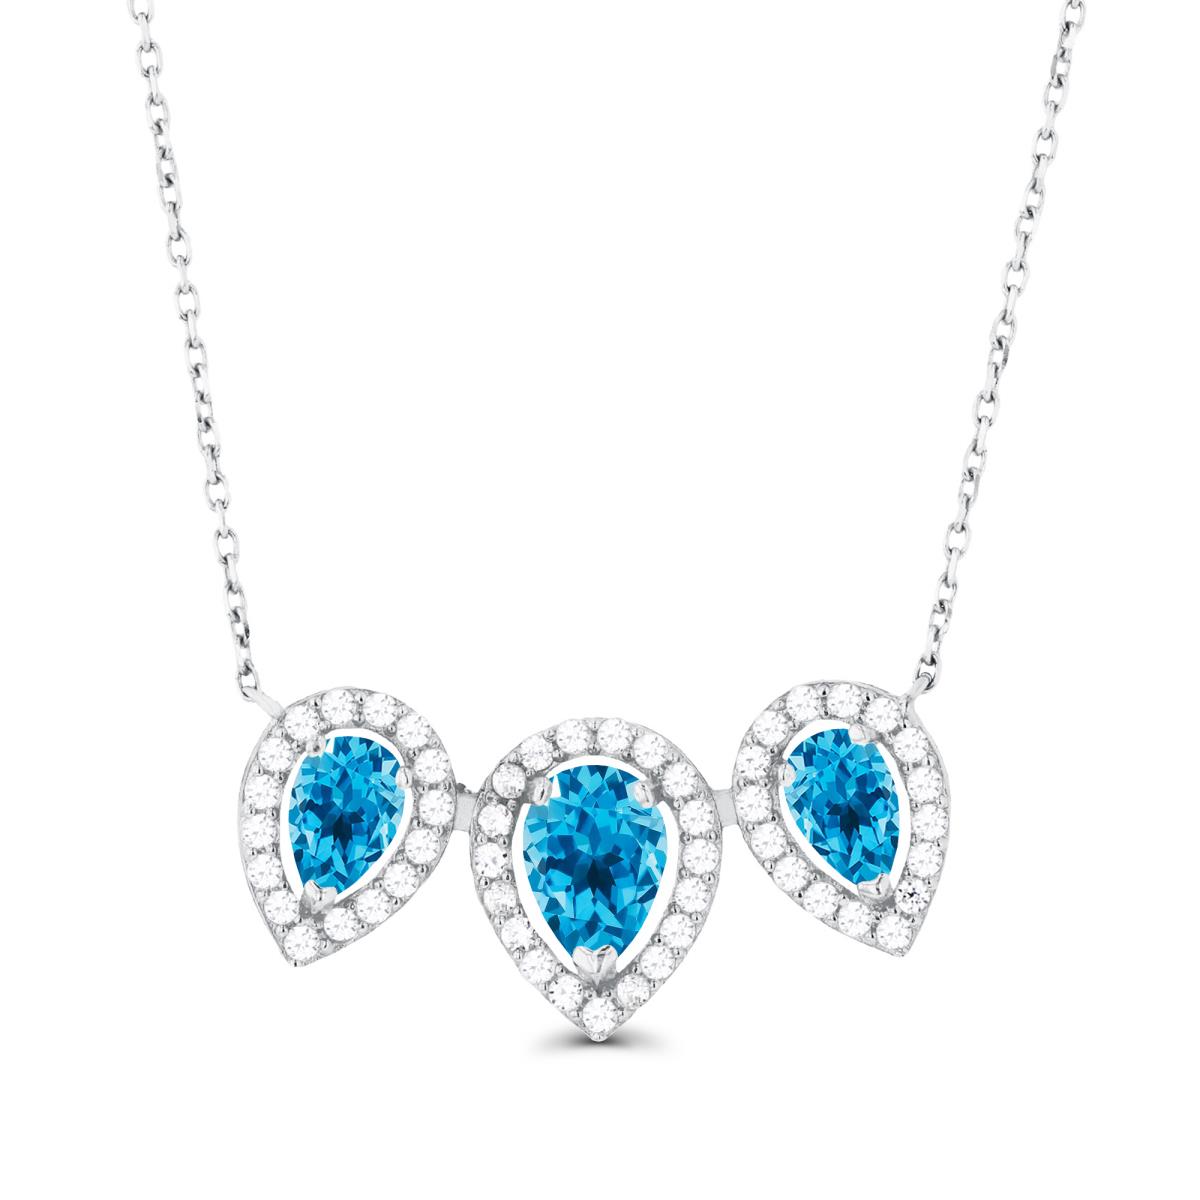 14K White Gold Triple Pear Swiss Blue Topaz & Created White Sapphire Halo 18"Necklace